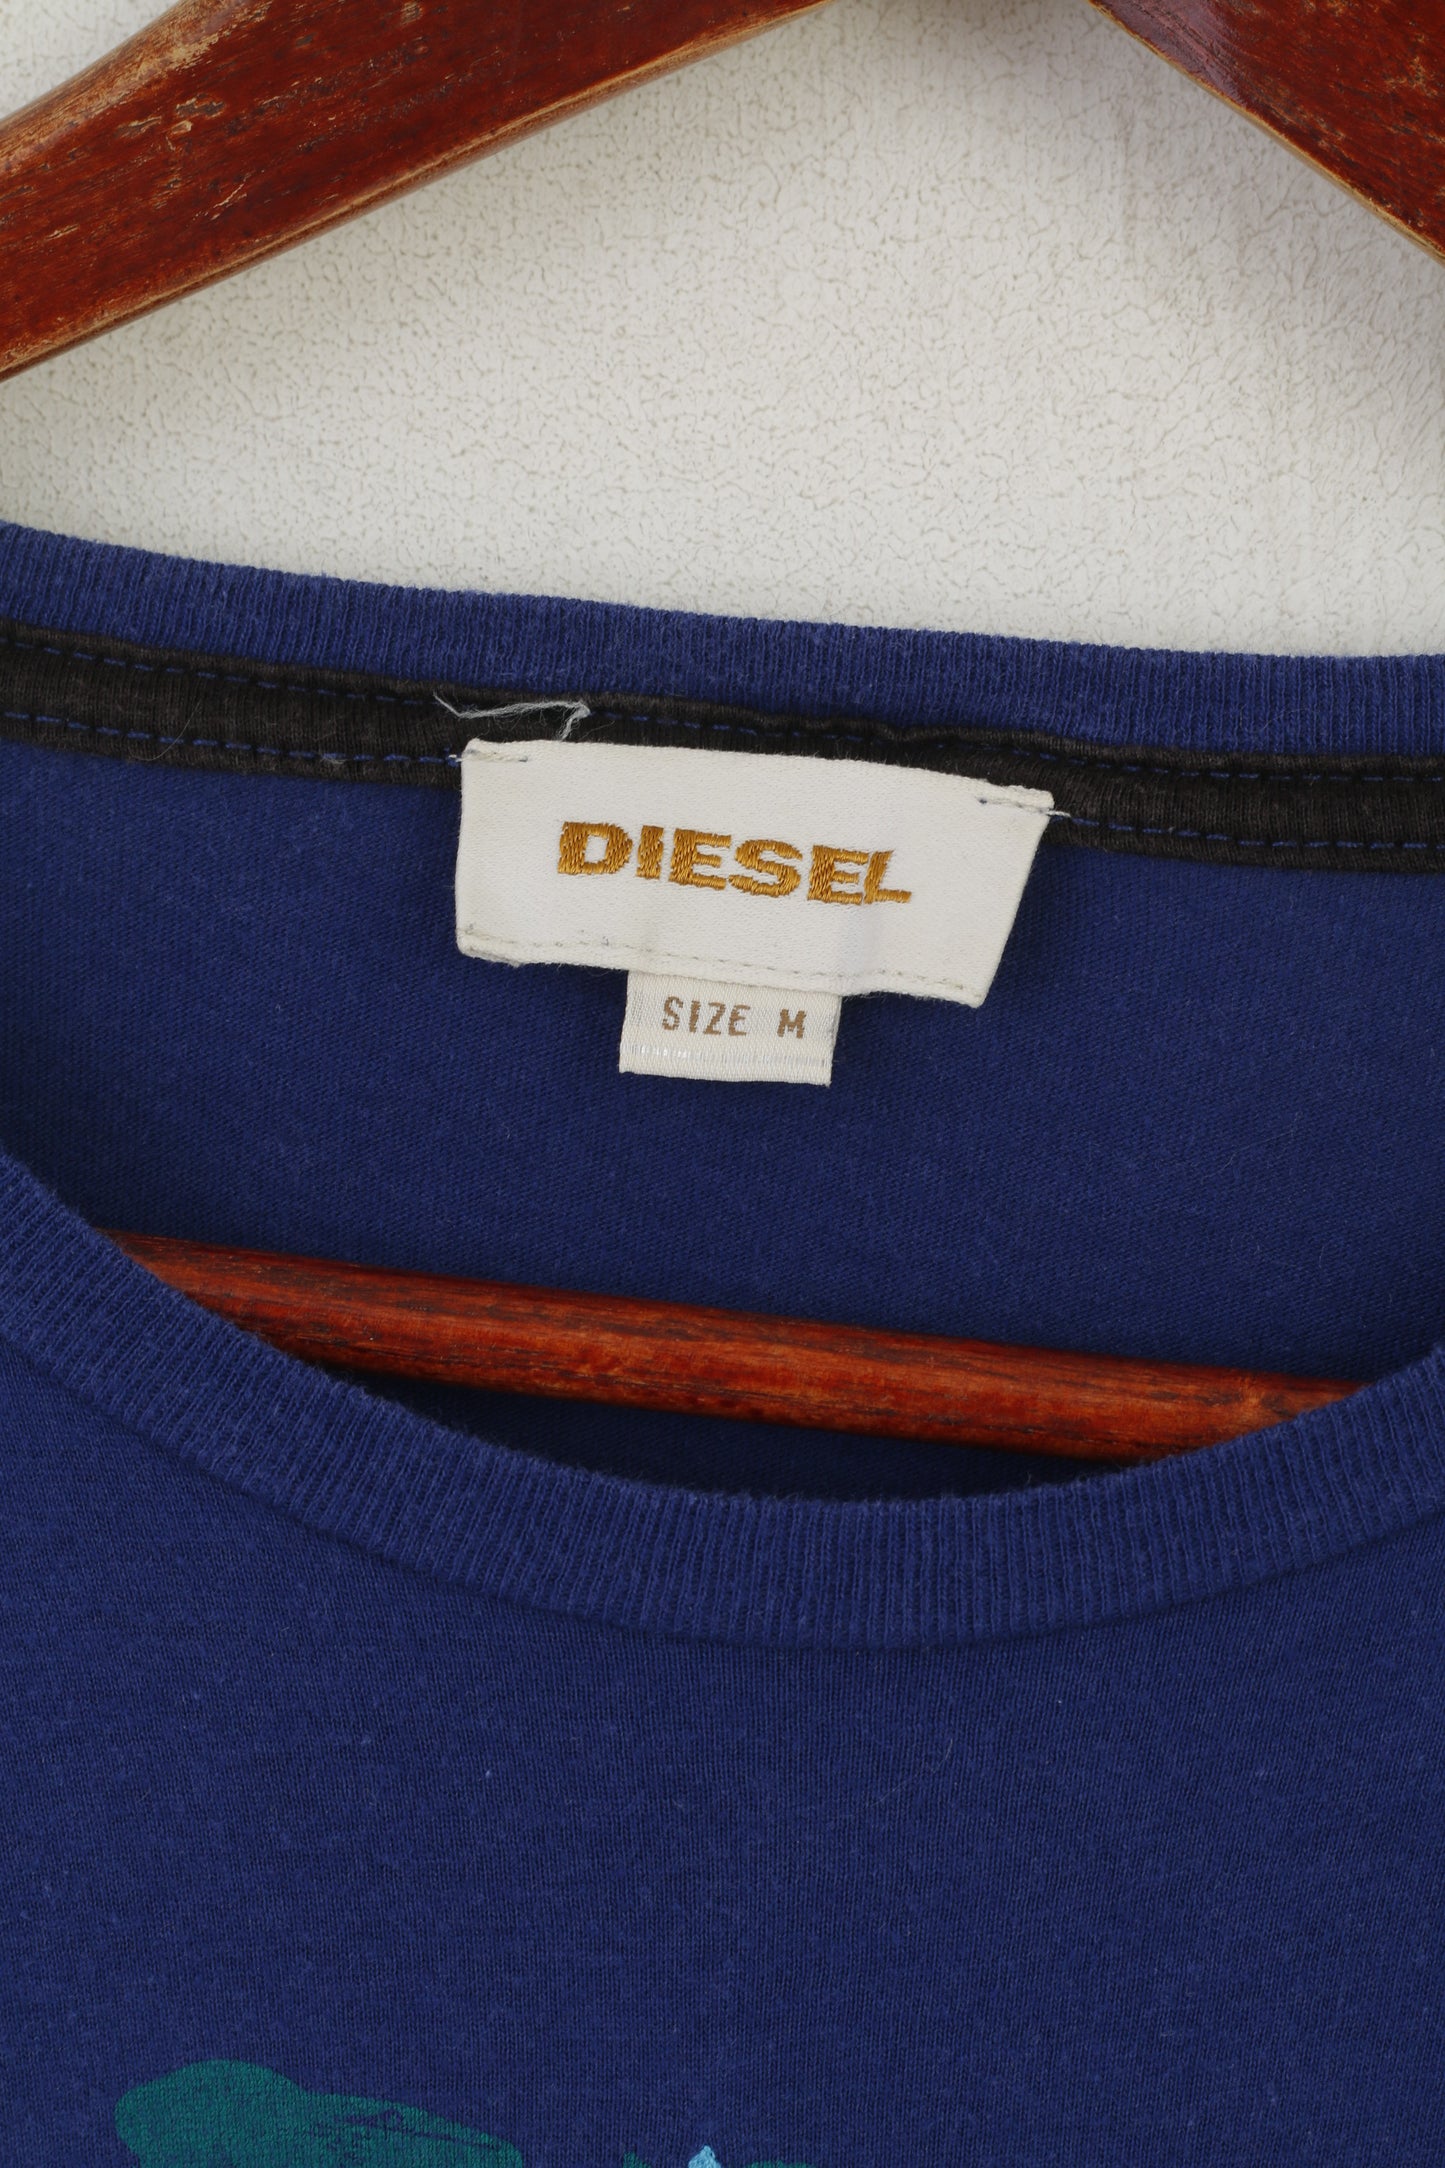 Diesel Men M Shirt Blue Cotton Graphic Embroidered Crew Neck Classic Top